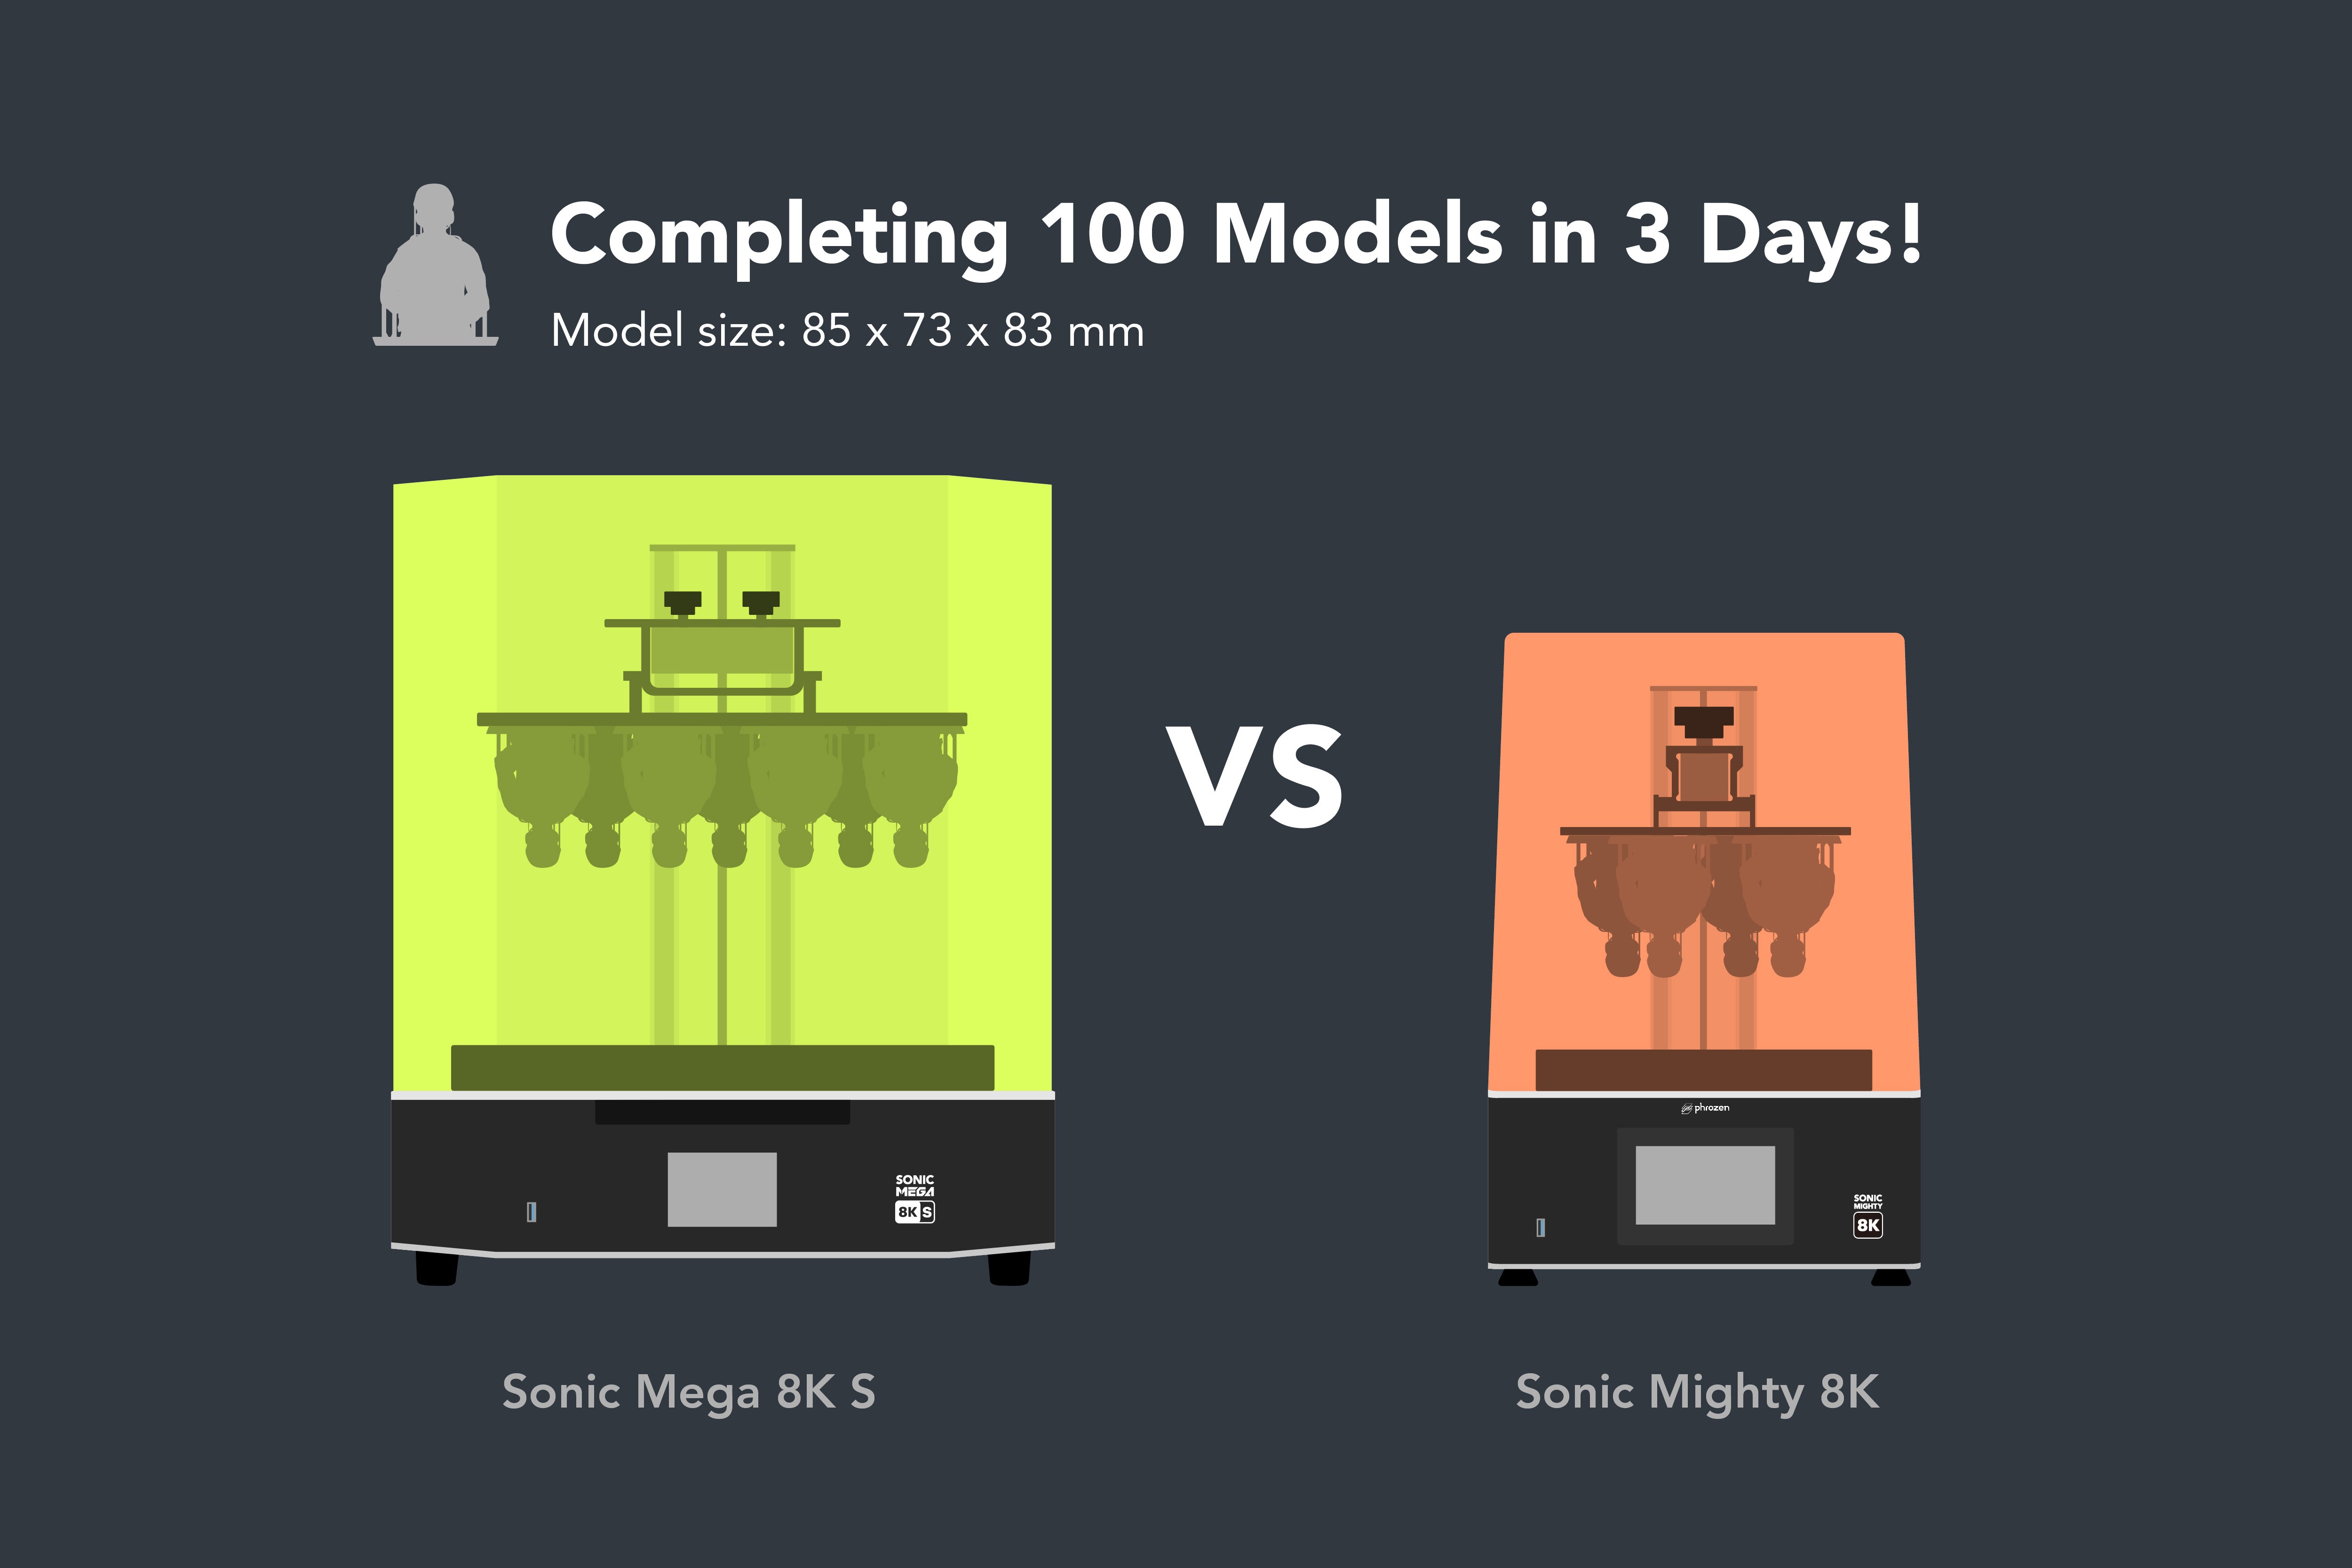 Comparing Sonic Mega 8K S and Sonic Mighty 8K